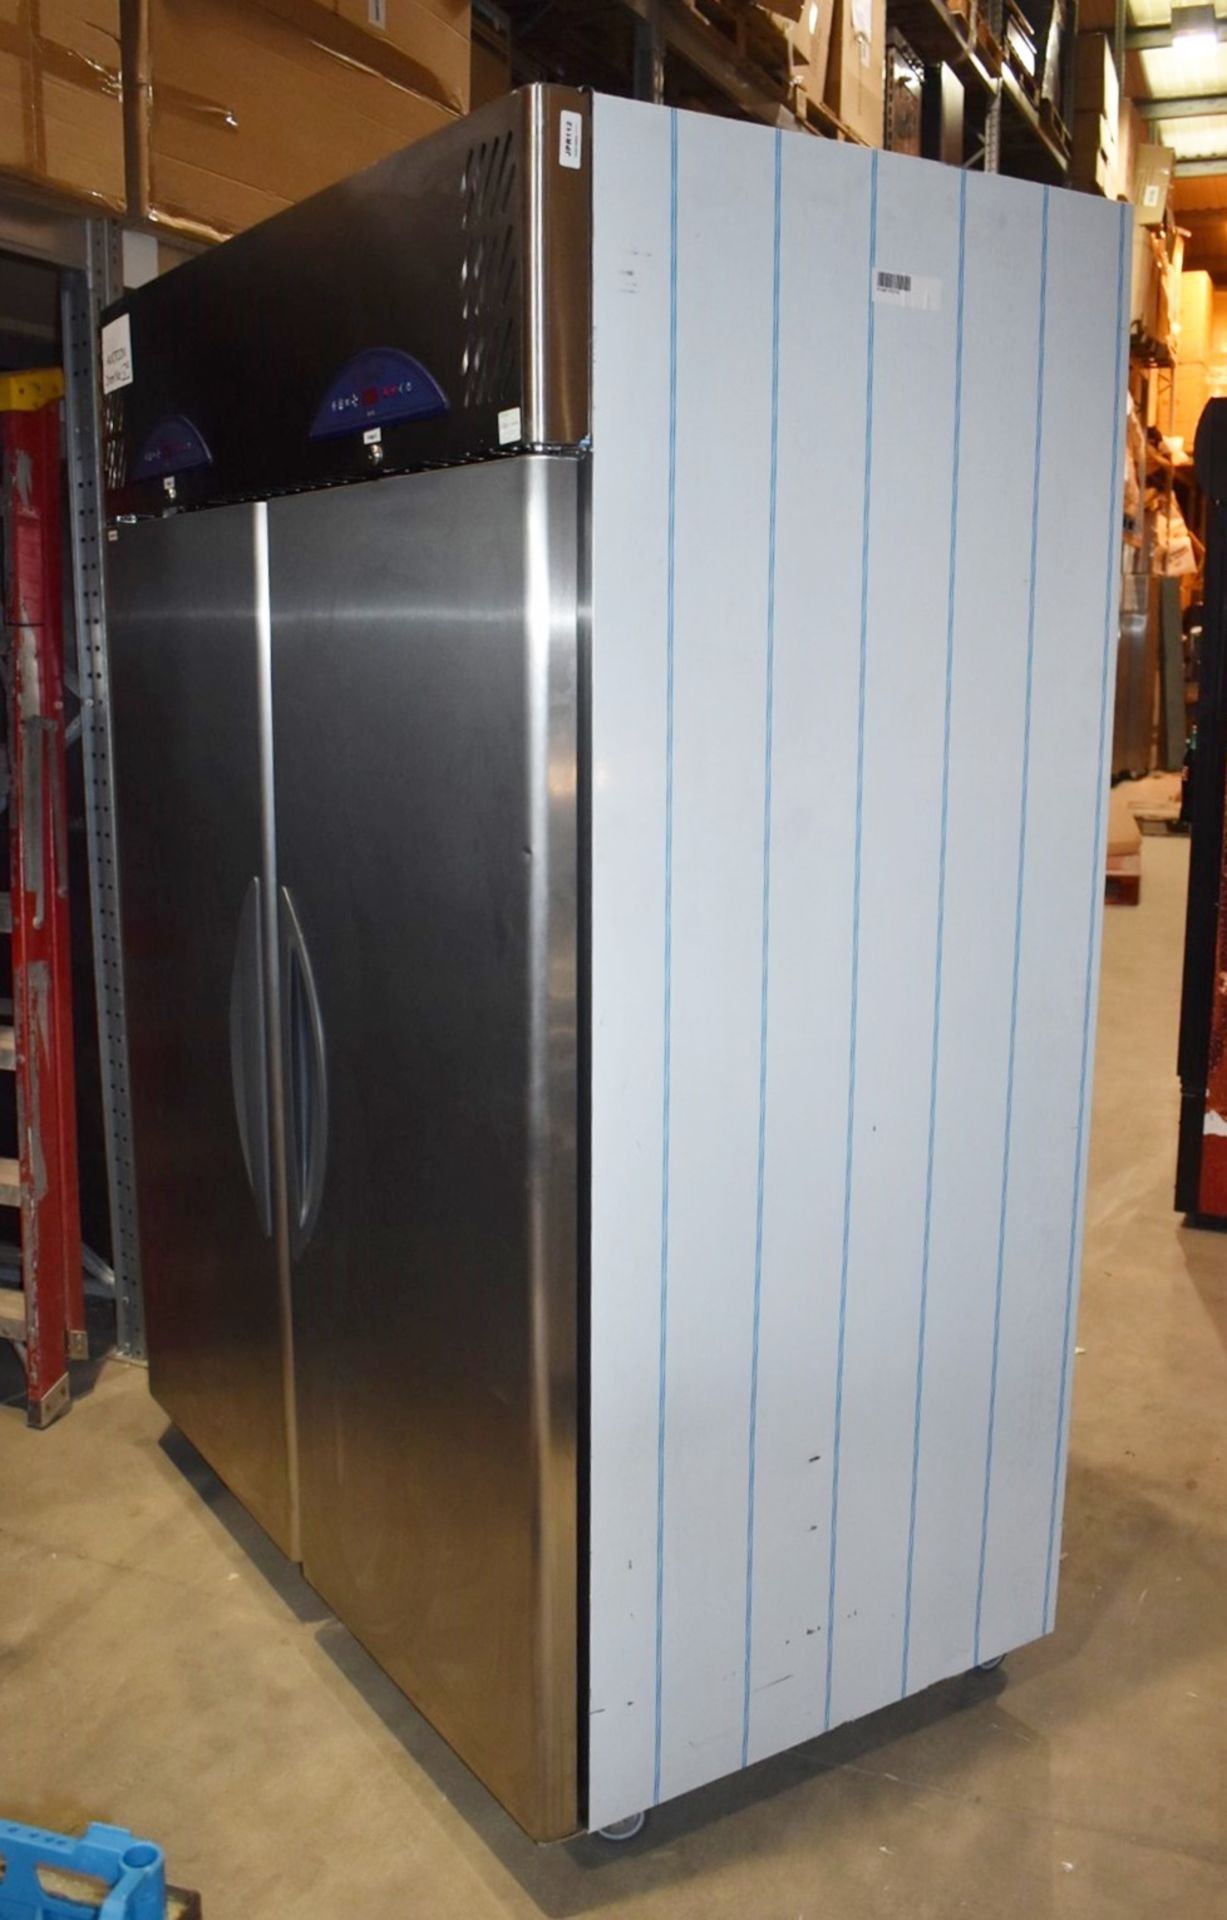 1 x Williams Garnet 2000 Two Door Upright Fish / Meat Fridge With Stainless Steel Finish - Model - Image 10 of 15